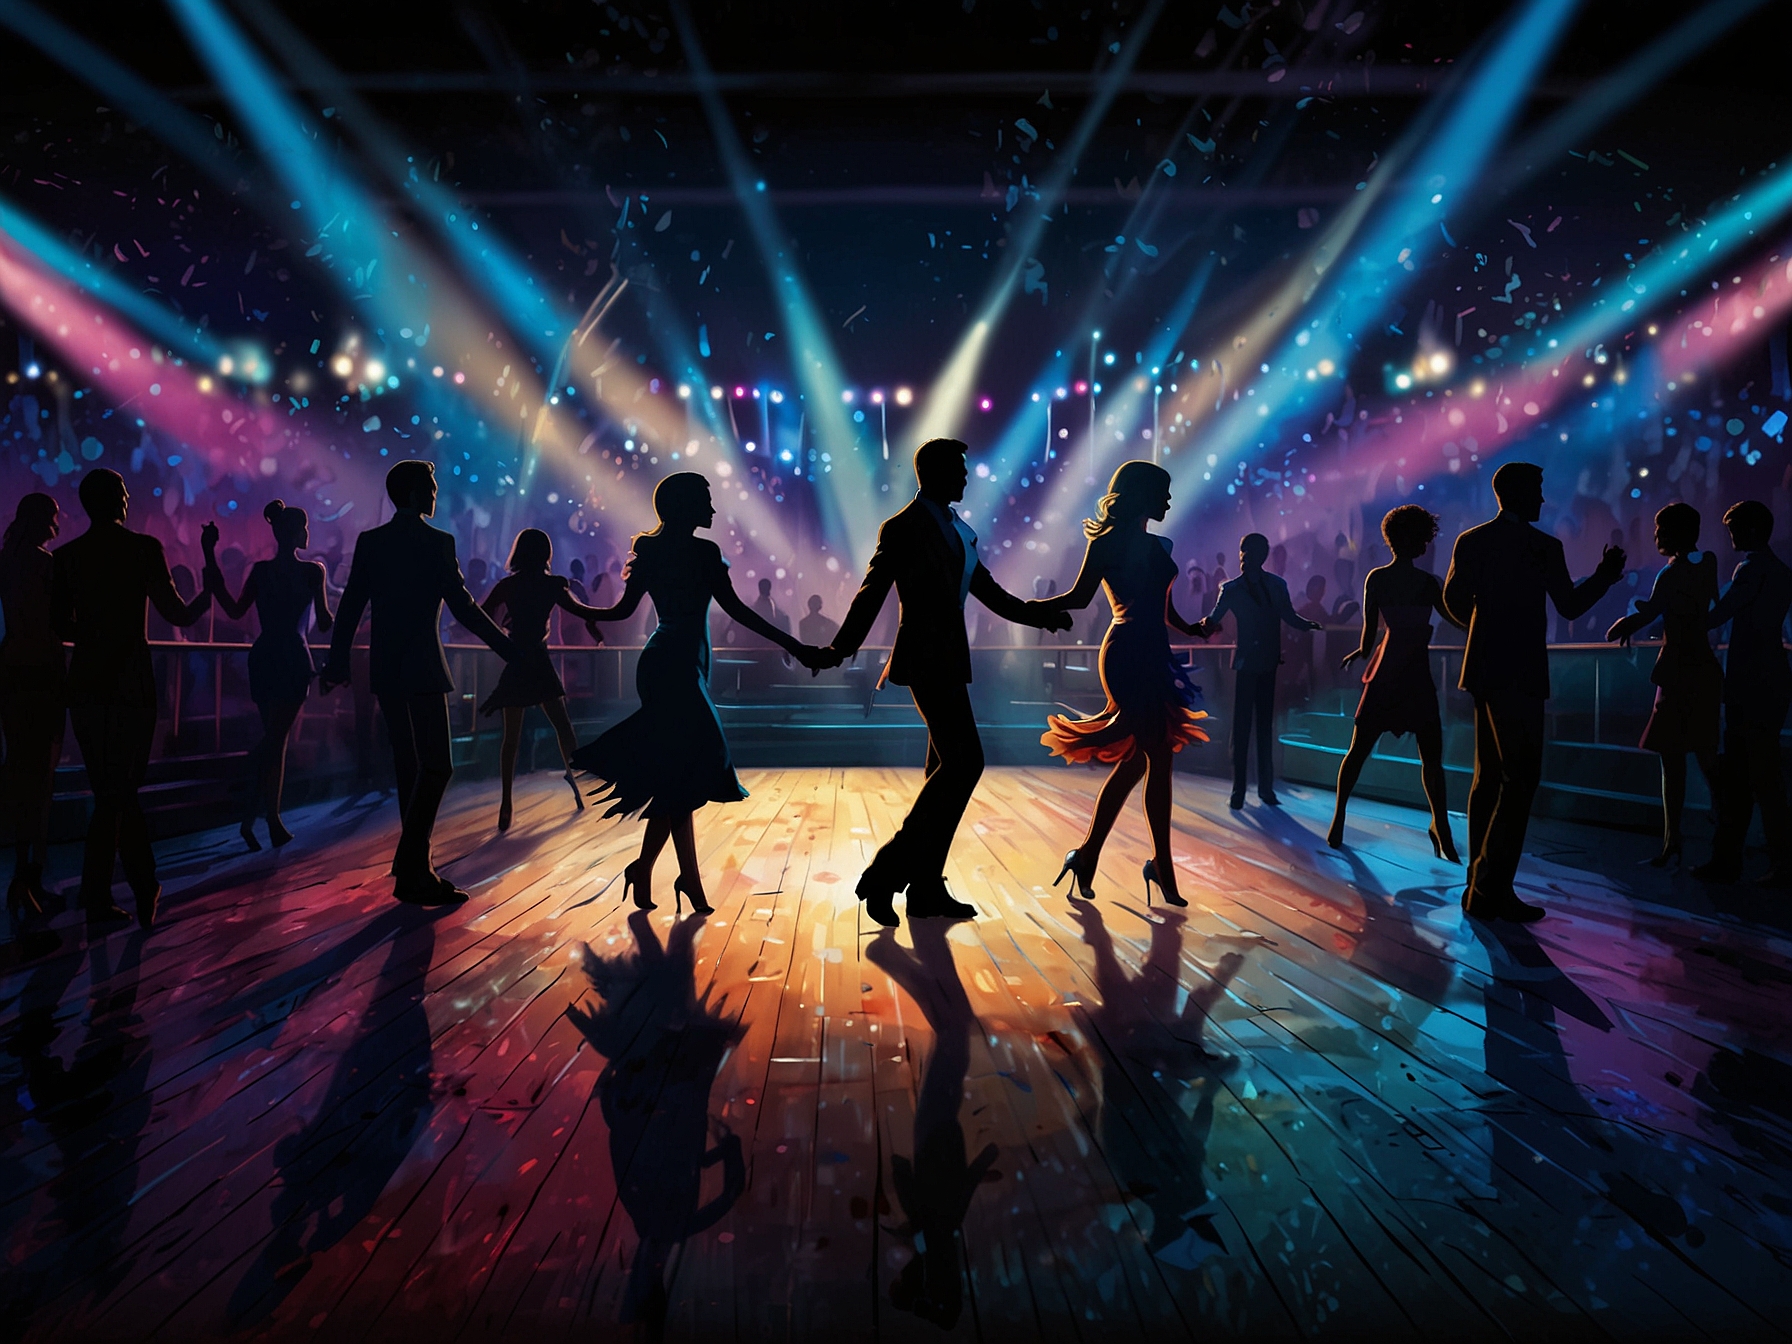 A vibrant dance floor setting with silhouetted dancers, representing the thrilling and high-profile nature of Strictly Come Dancing and the kind of environment the British hero might enter.